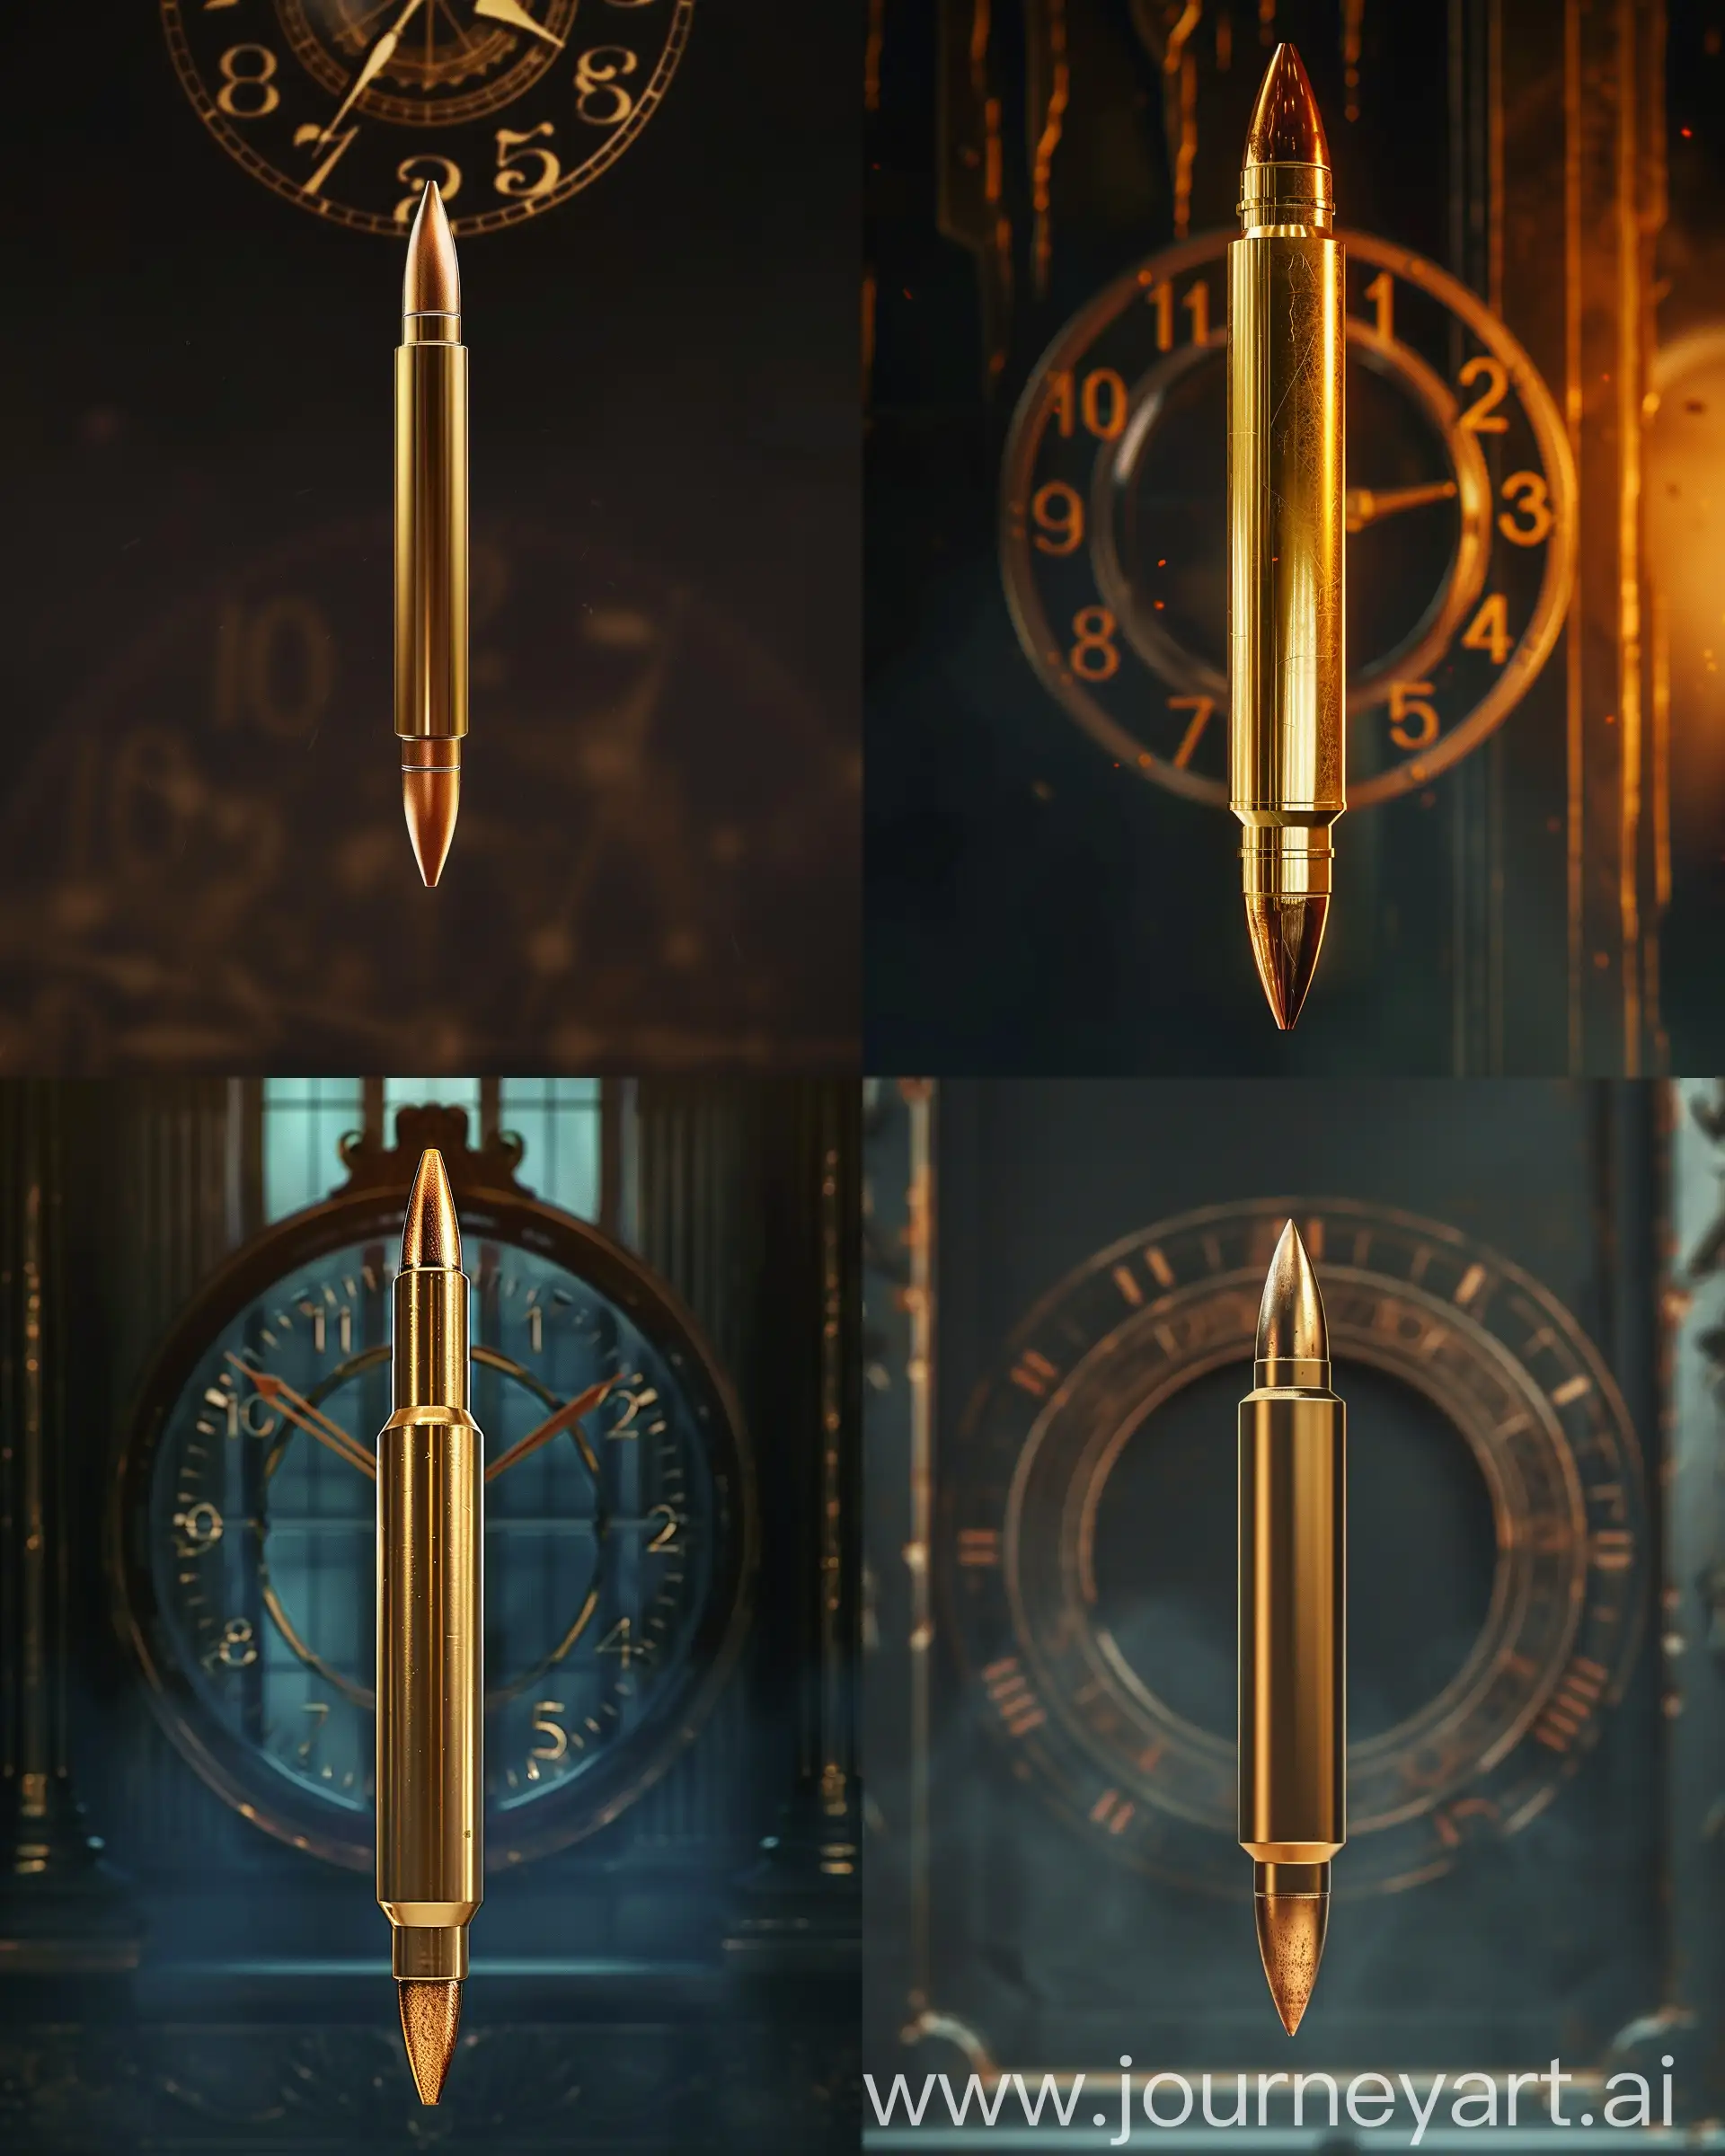 A close-up of a golden bullet with a copper tip, floating vertically against a dark background. The bullet is positioned in the center of the image with a clock face design surrounding it, indicating hours from 1 to 12. The background is blurred and minimalistic. The overall aesthetic is cinematic and polished, with soft lighting highlighting the bullet's metallic surface. No text on the image --v 6 --ar 4:5